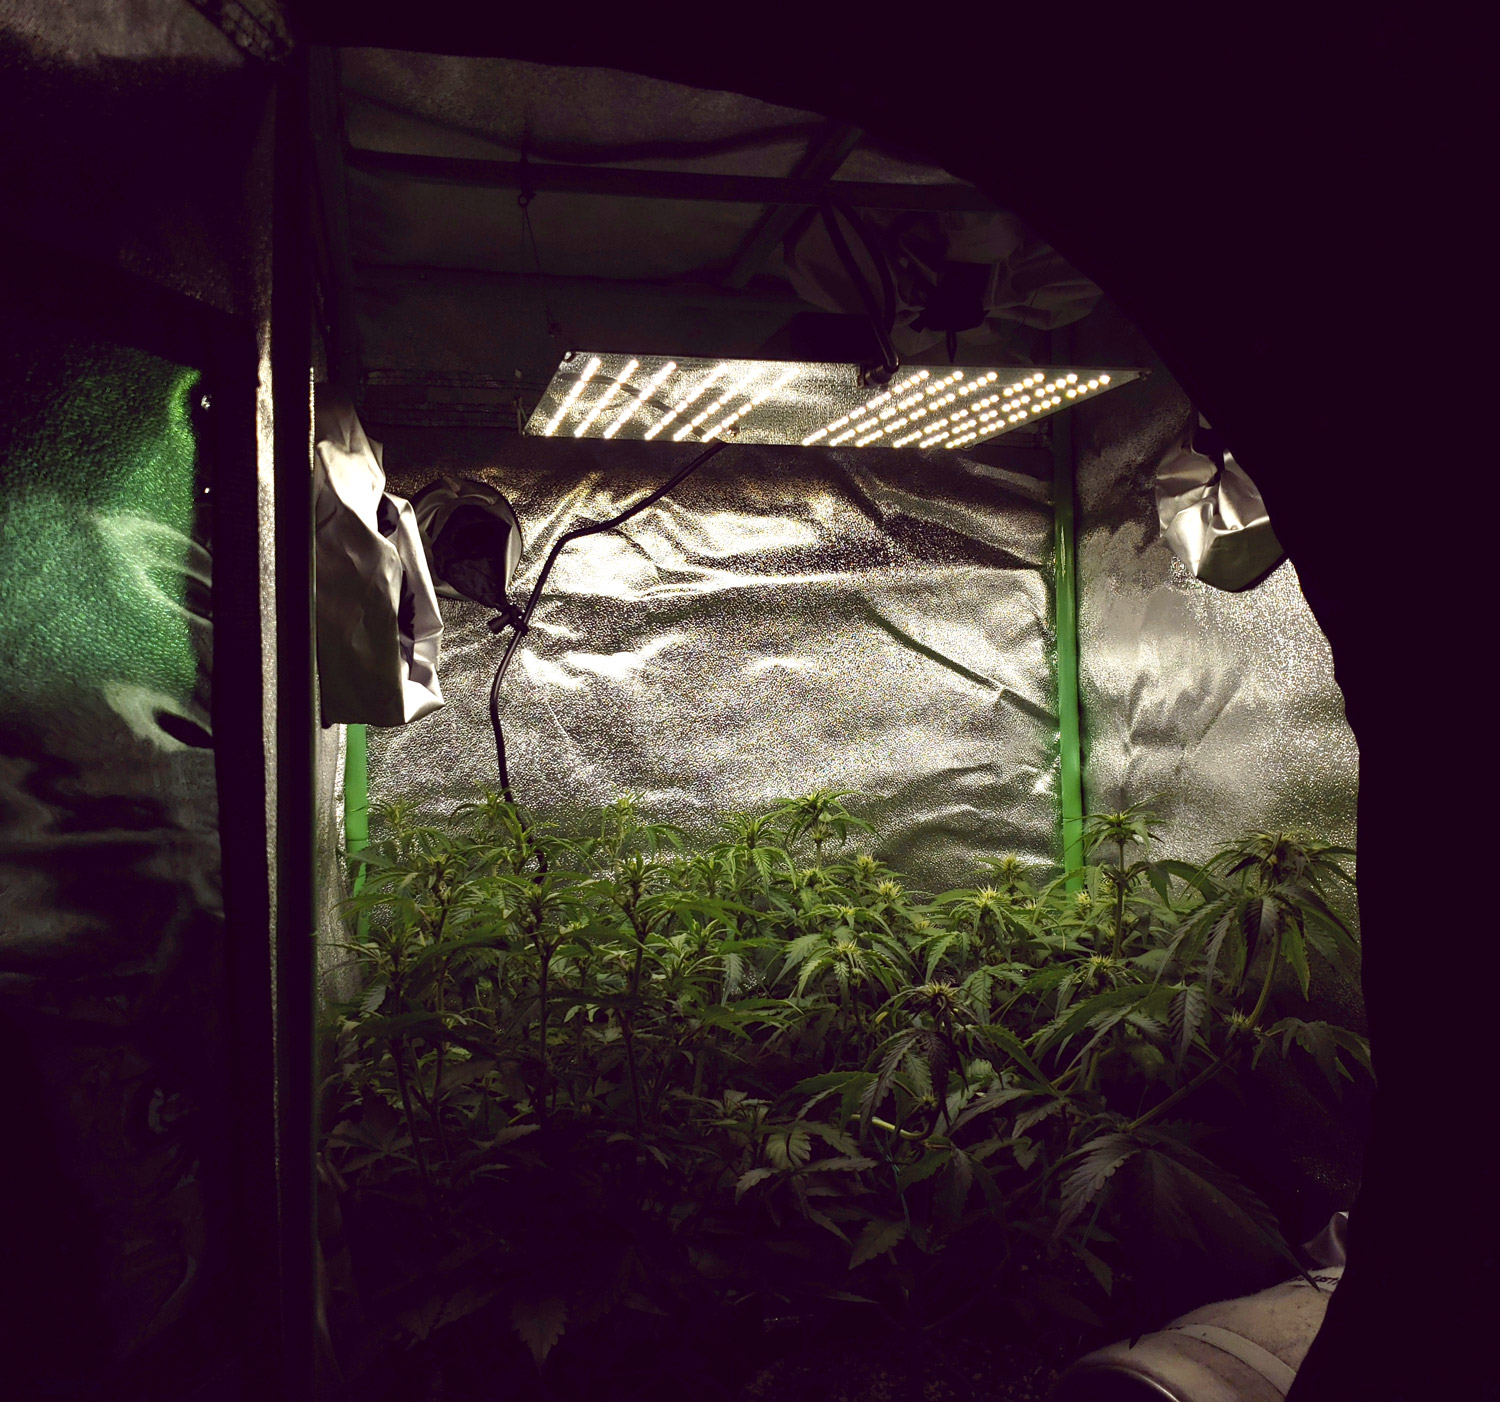 Our mini tent growing weed